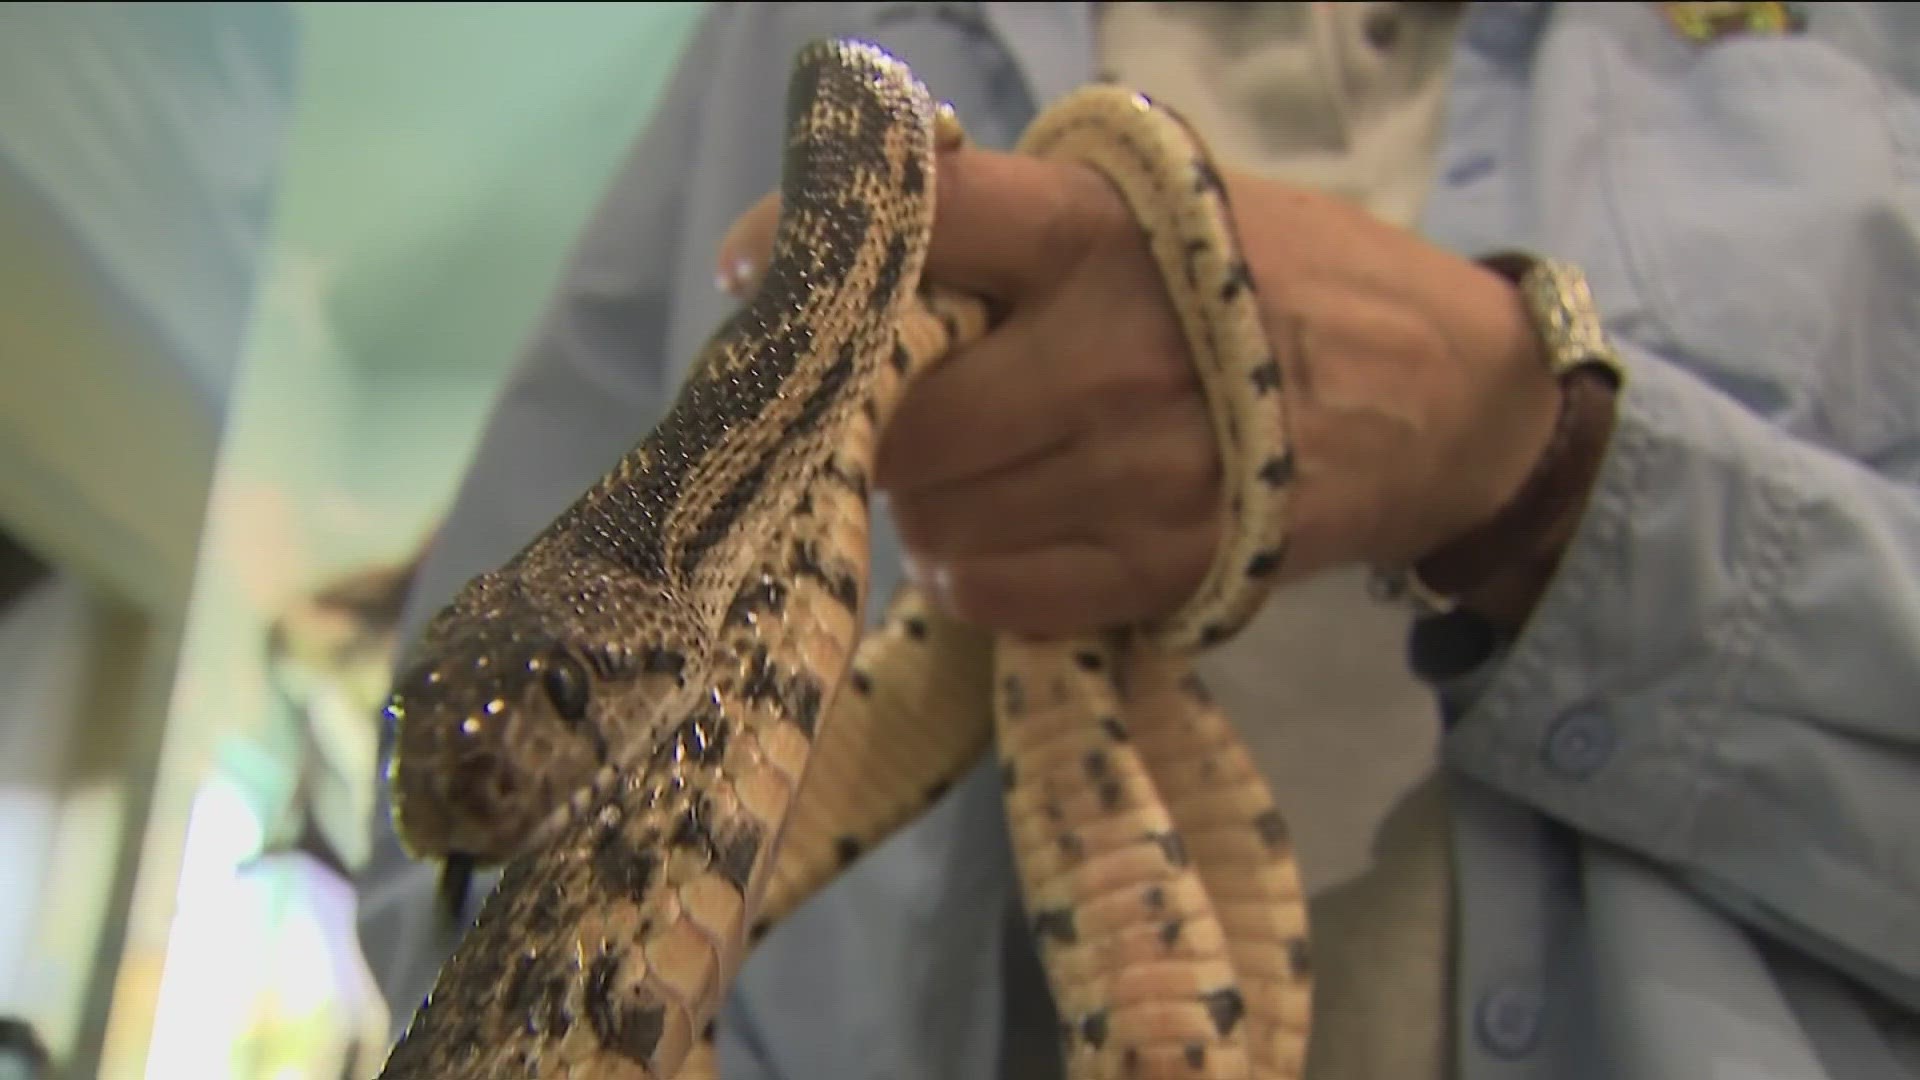 In only one week, two Idaho children were bitten by rattlesnakes - a 13-year-old boy from Featherville and a 9-year-old girl from Idaho Falls while she was swimming.